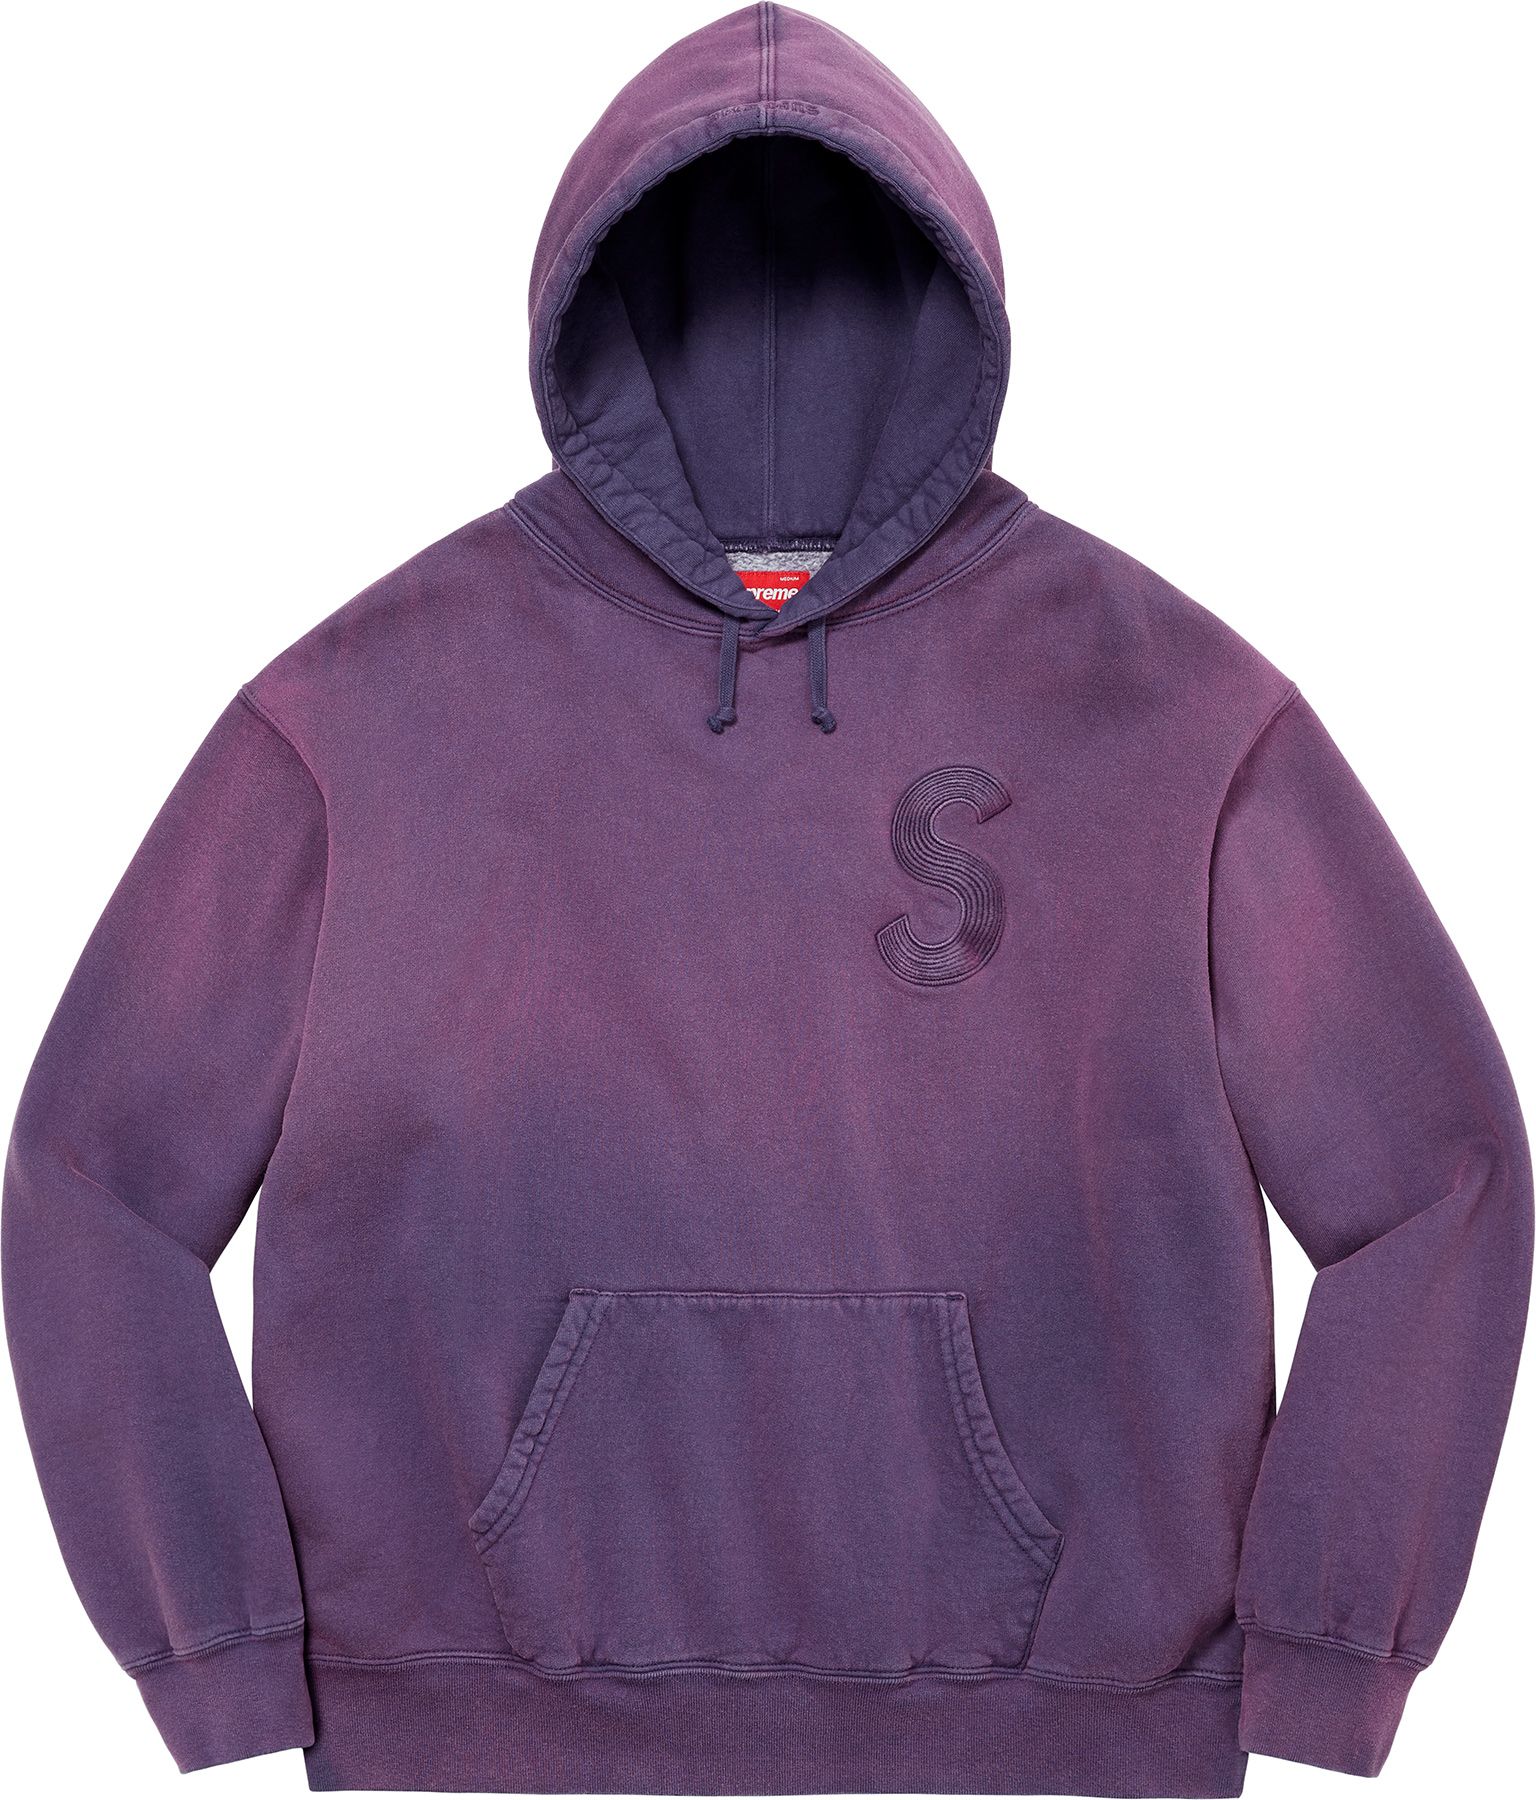 Overdyed S Logo Hooded Sweatshirt - Spring/Summer 2023 Preview